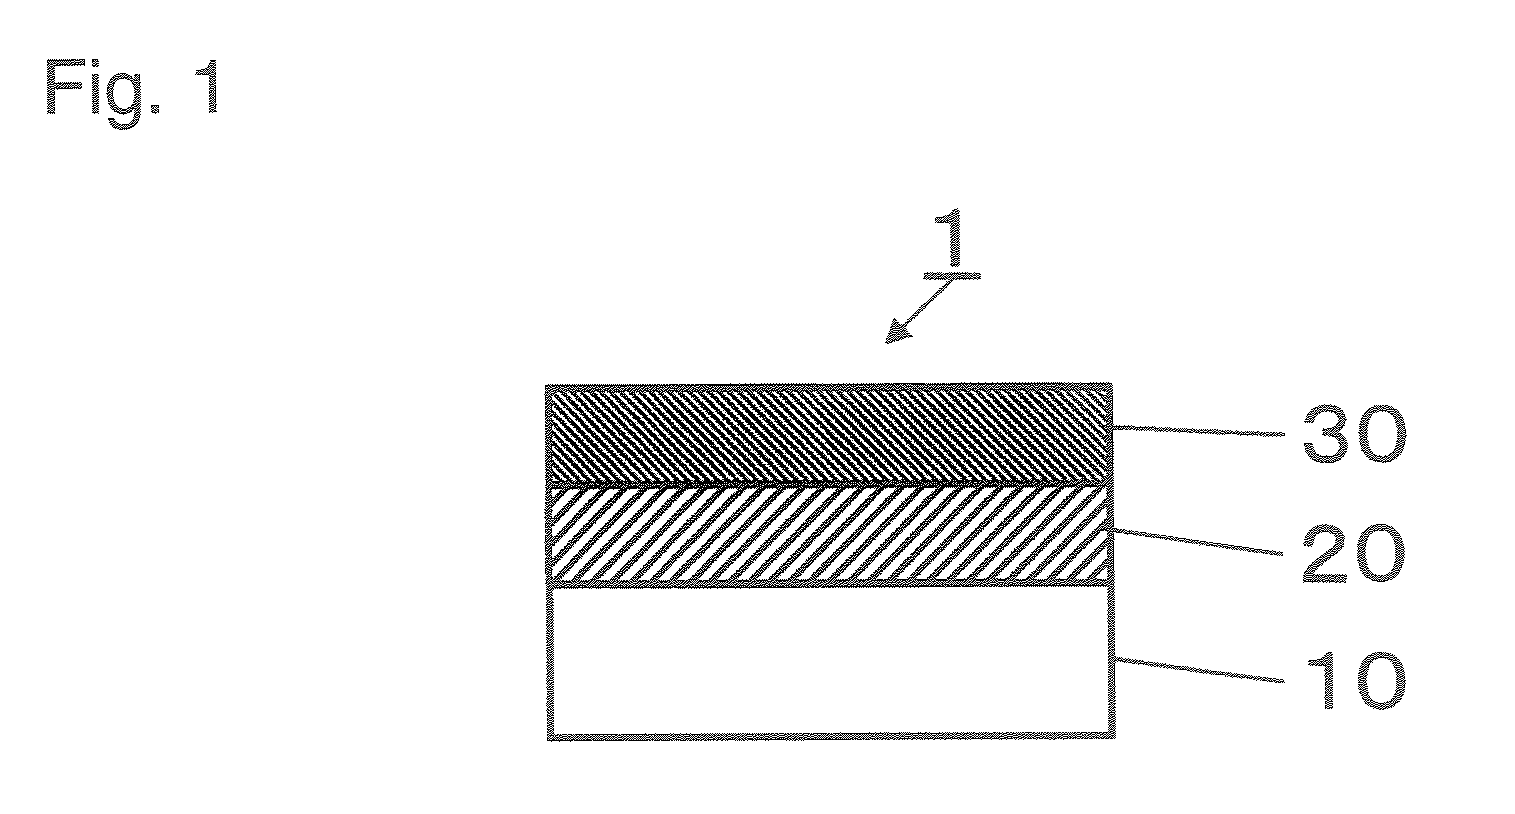 Substratum with conductive film and process for producing the same